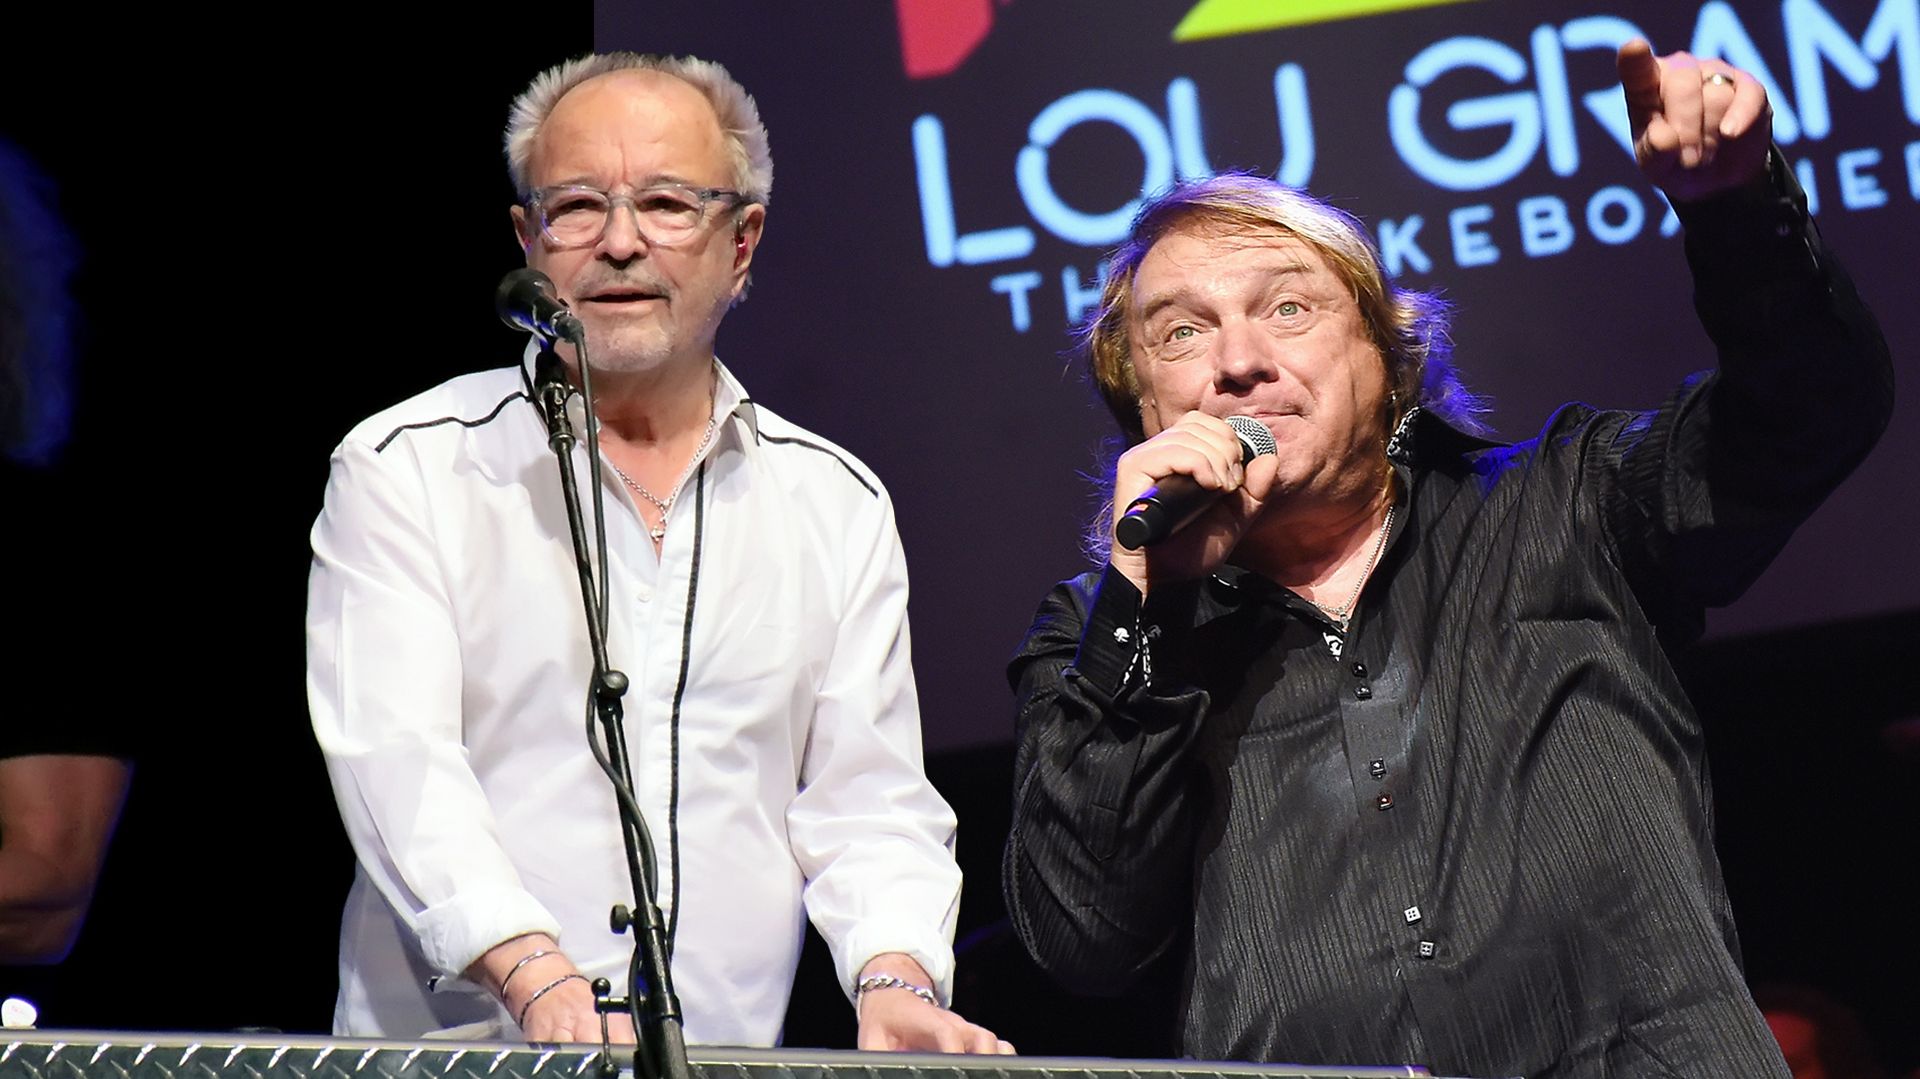 Lou Gramm takes aim at Mick Jones over songwriting credits and musical ...